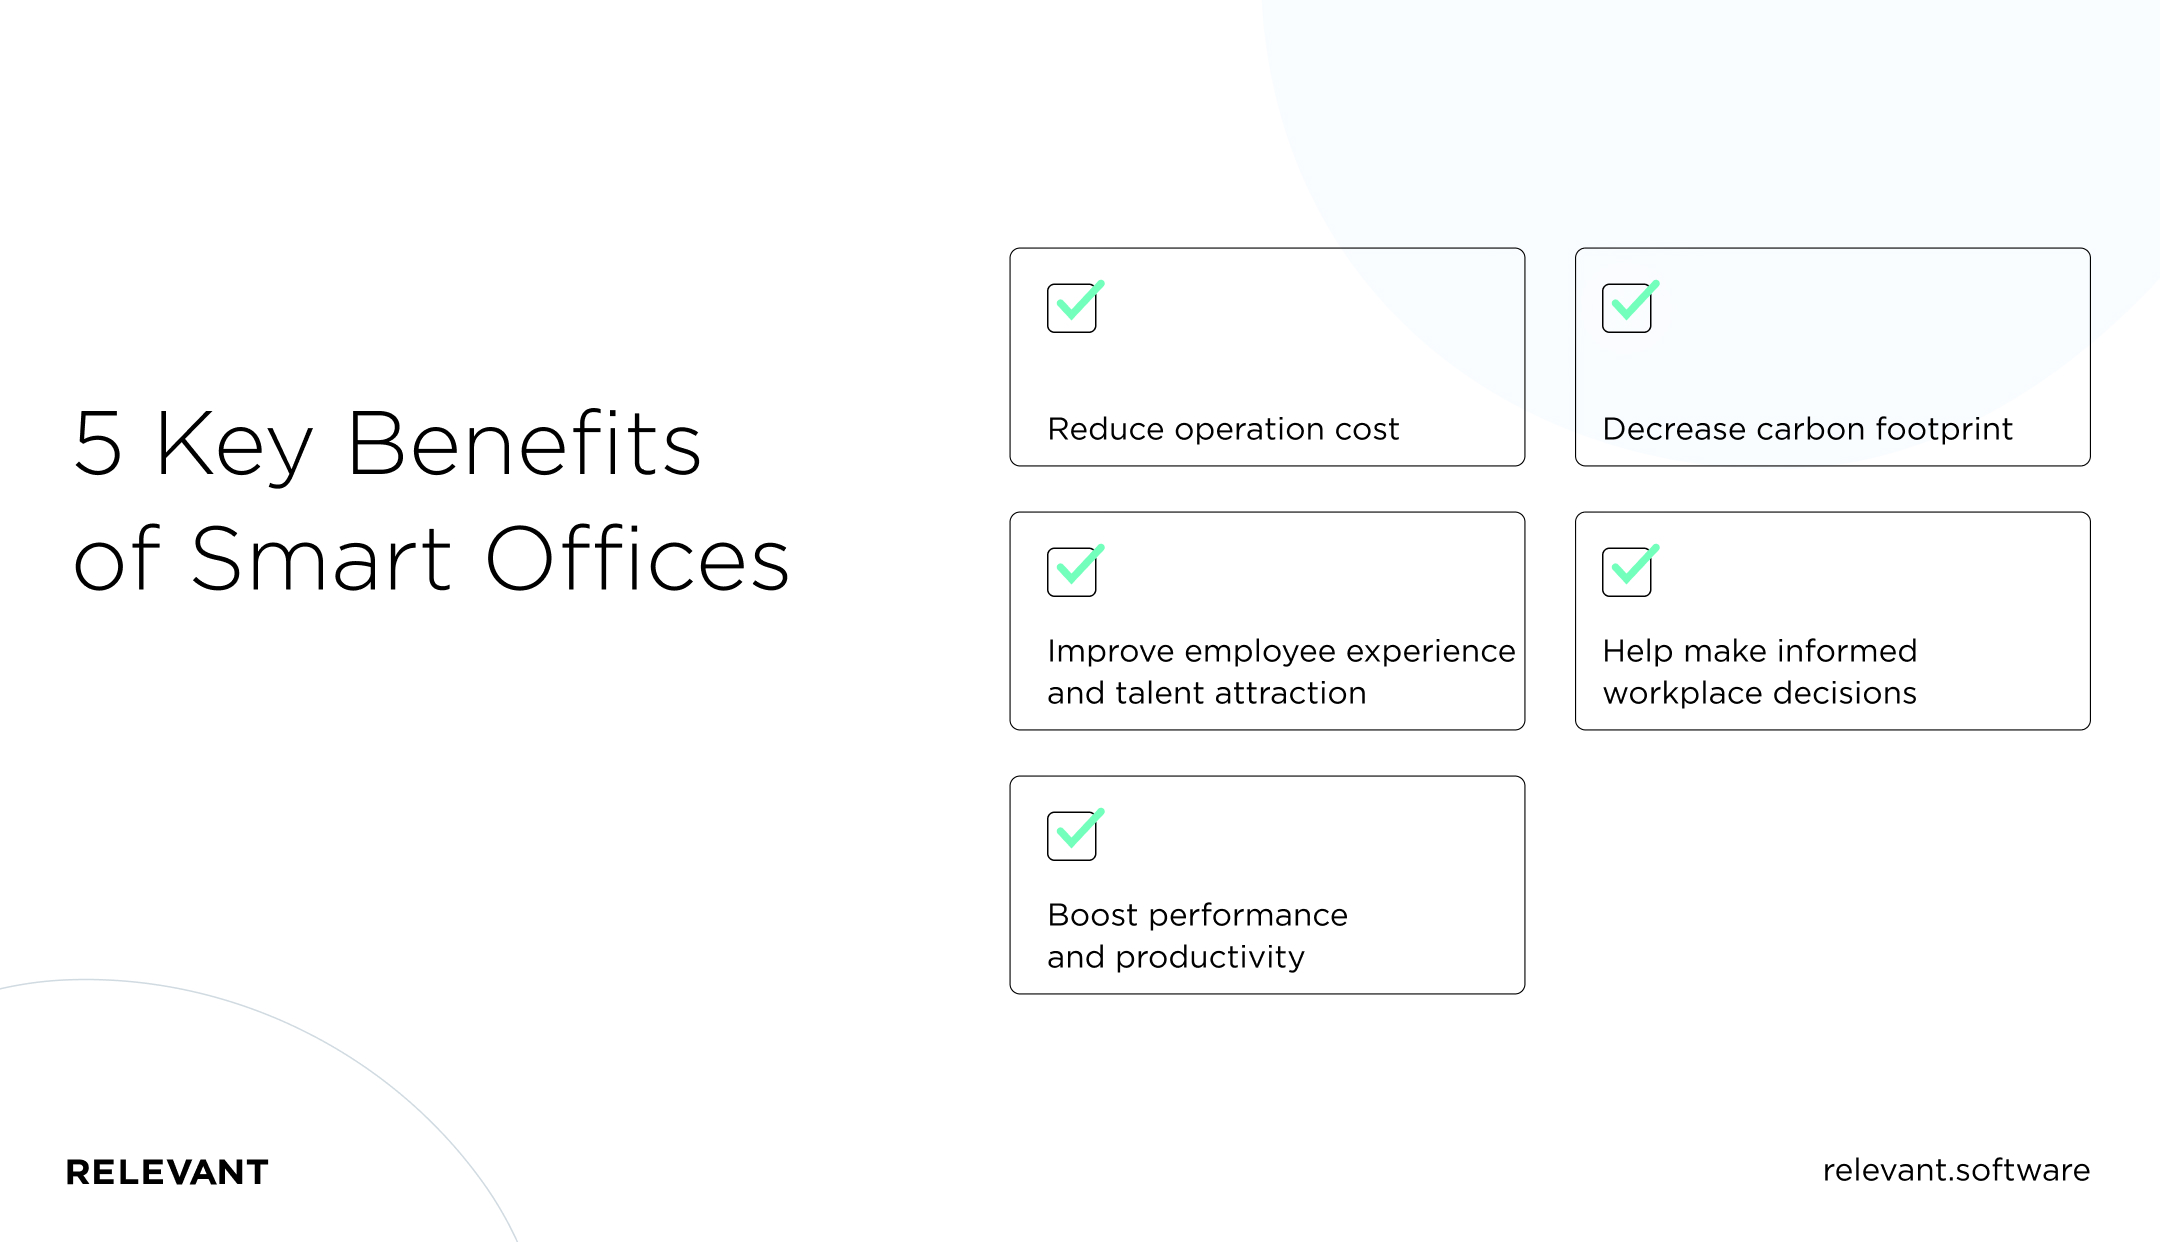 5 Key Benefits of Smart Offices